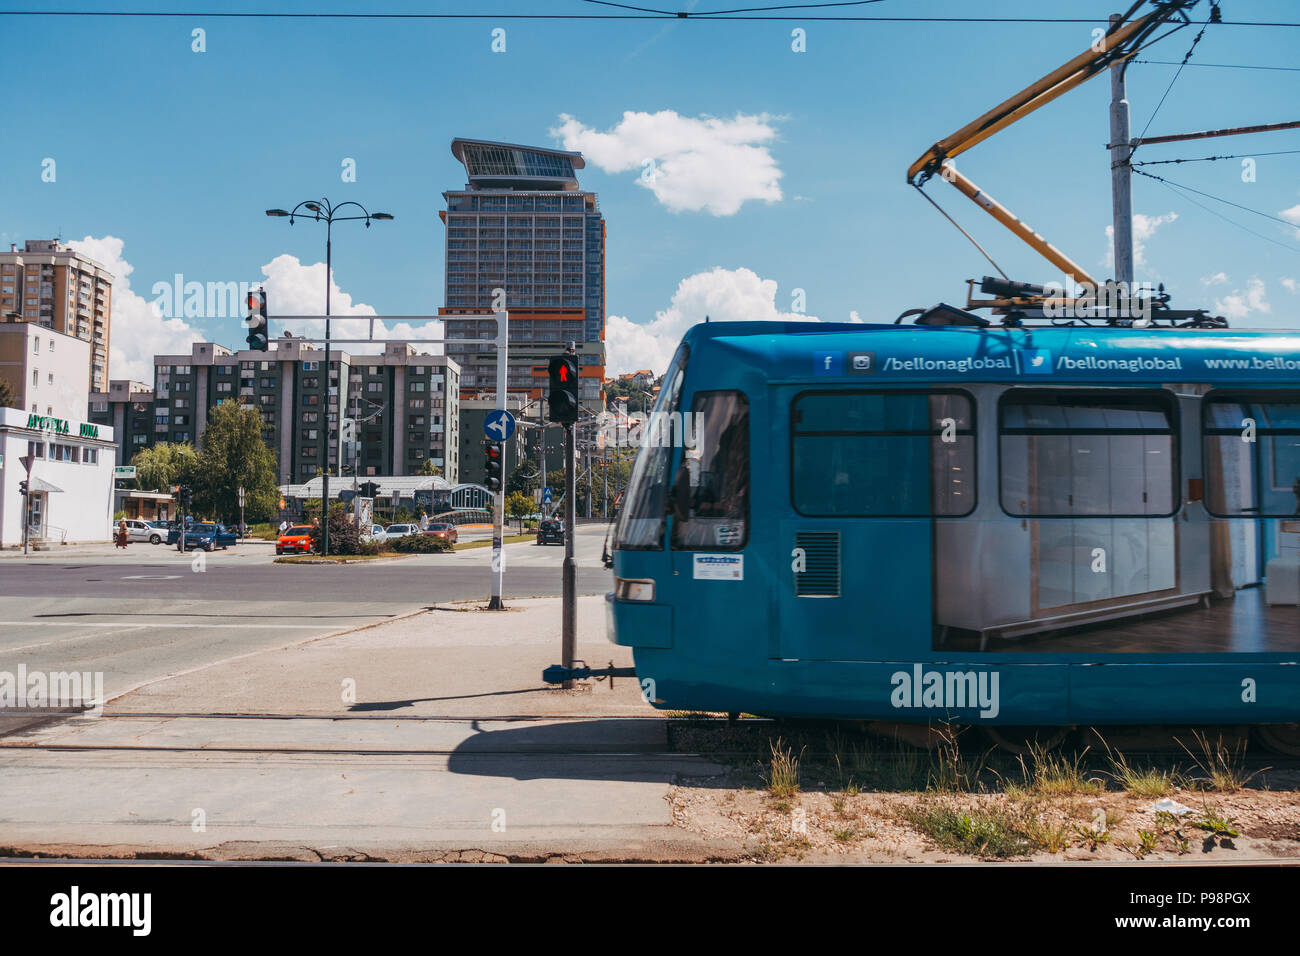 A tramcar enters a railway crossing at an intersection in suburban Sarajevo, Bosnia and Herzegovina Stock Photo